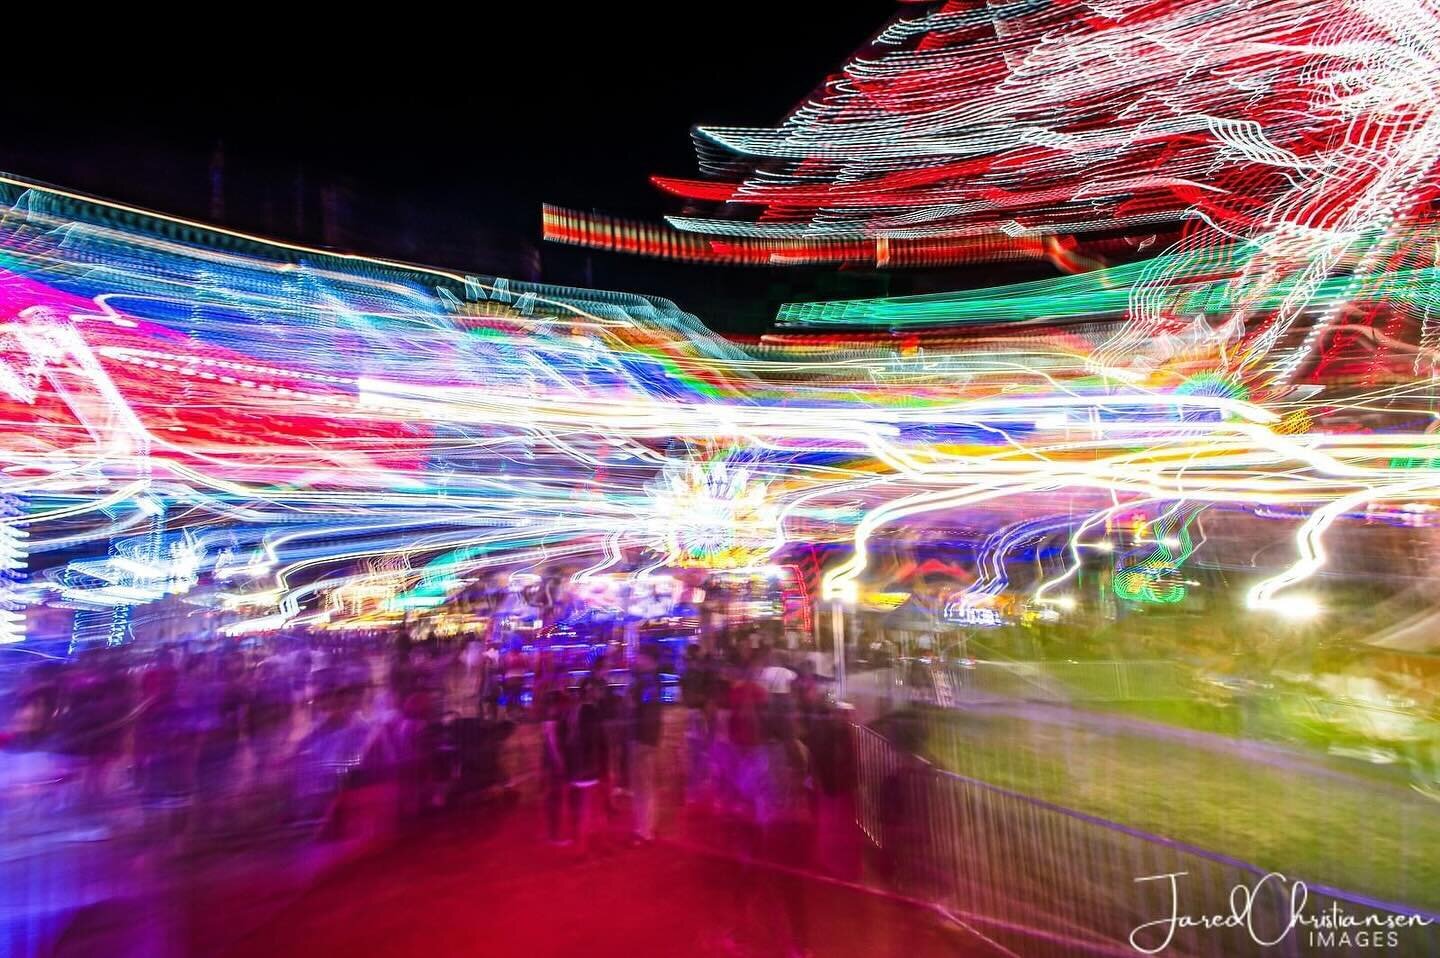 this ride we&rsquo;re on -

.
#threeriversfestival #carnivalrides #myfortwayne #abstractlight #abstractlightpainting #chasinglight #chasinglights #lightabstract #lightabstractions #lightphoto #lightphotography #creativelight #light_shots #abstracticm